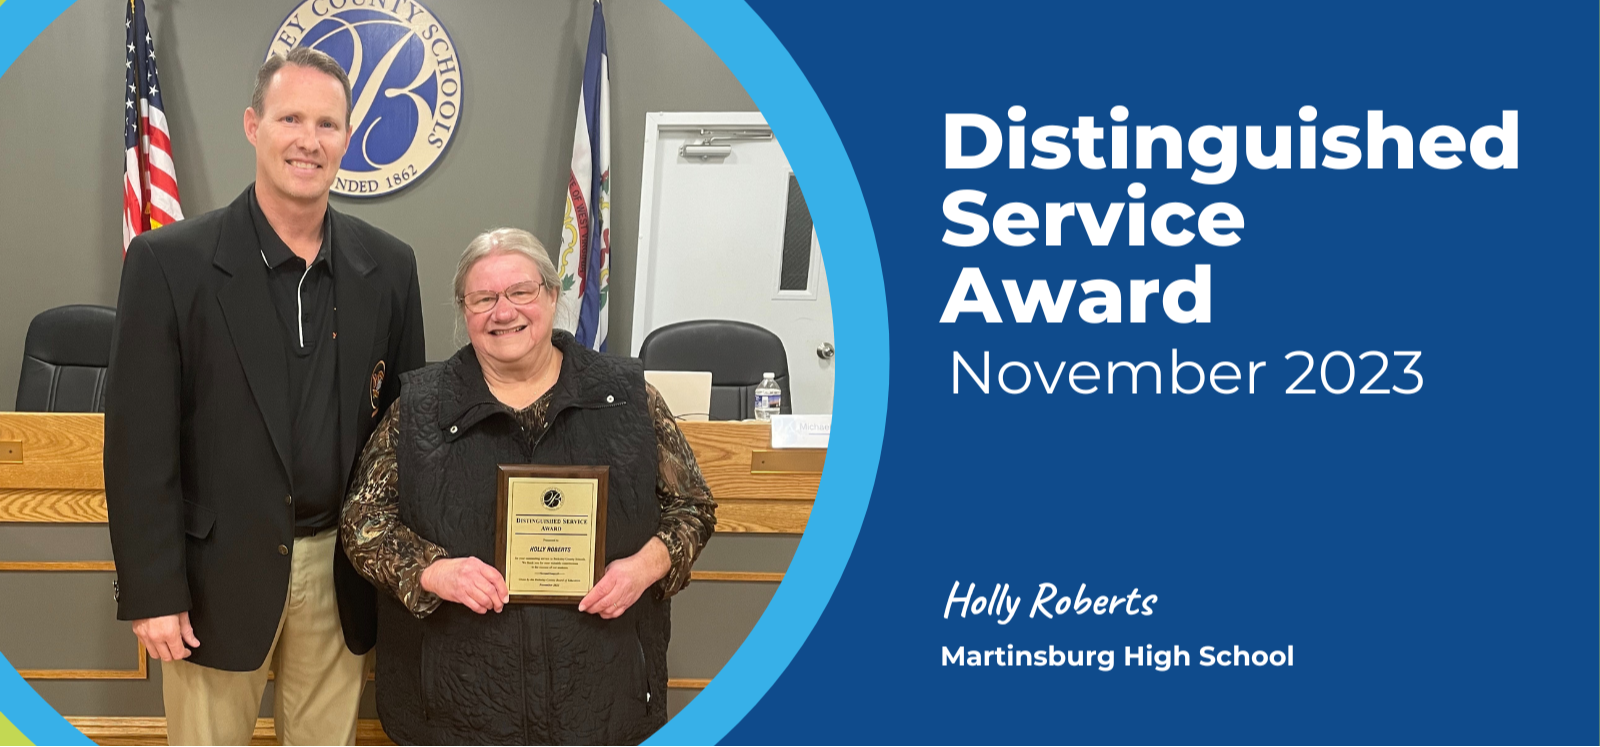 image of distinguished service award recipient holly roberts standing with principal trent sherman